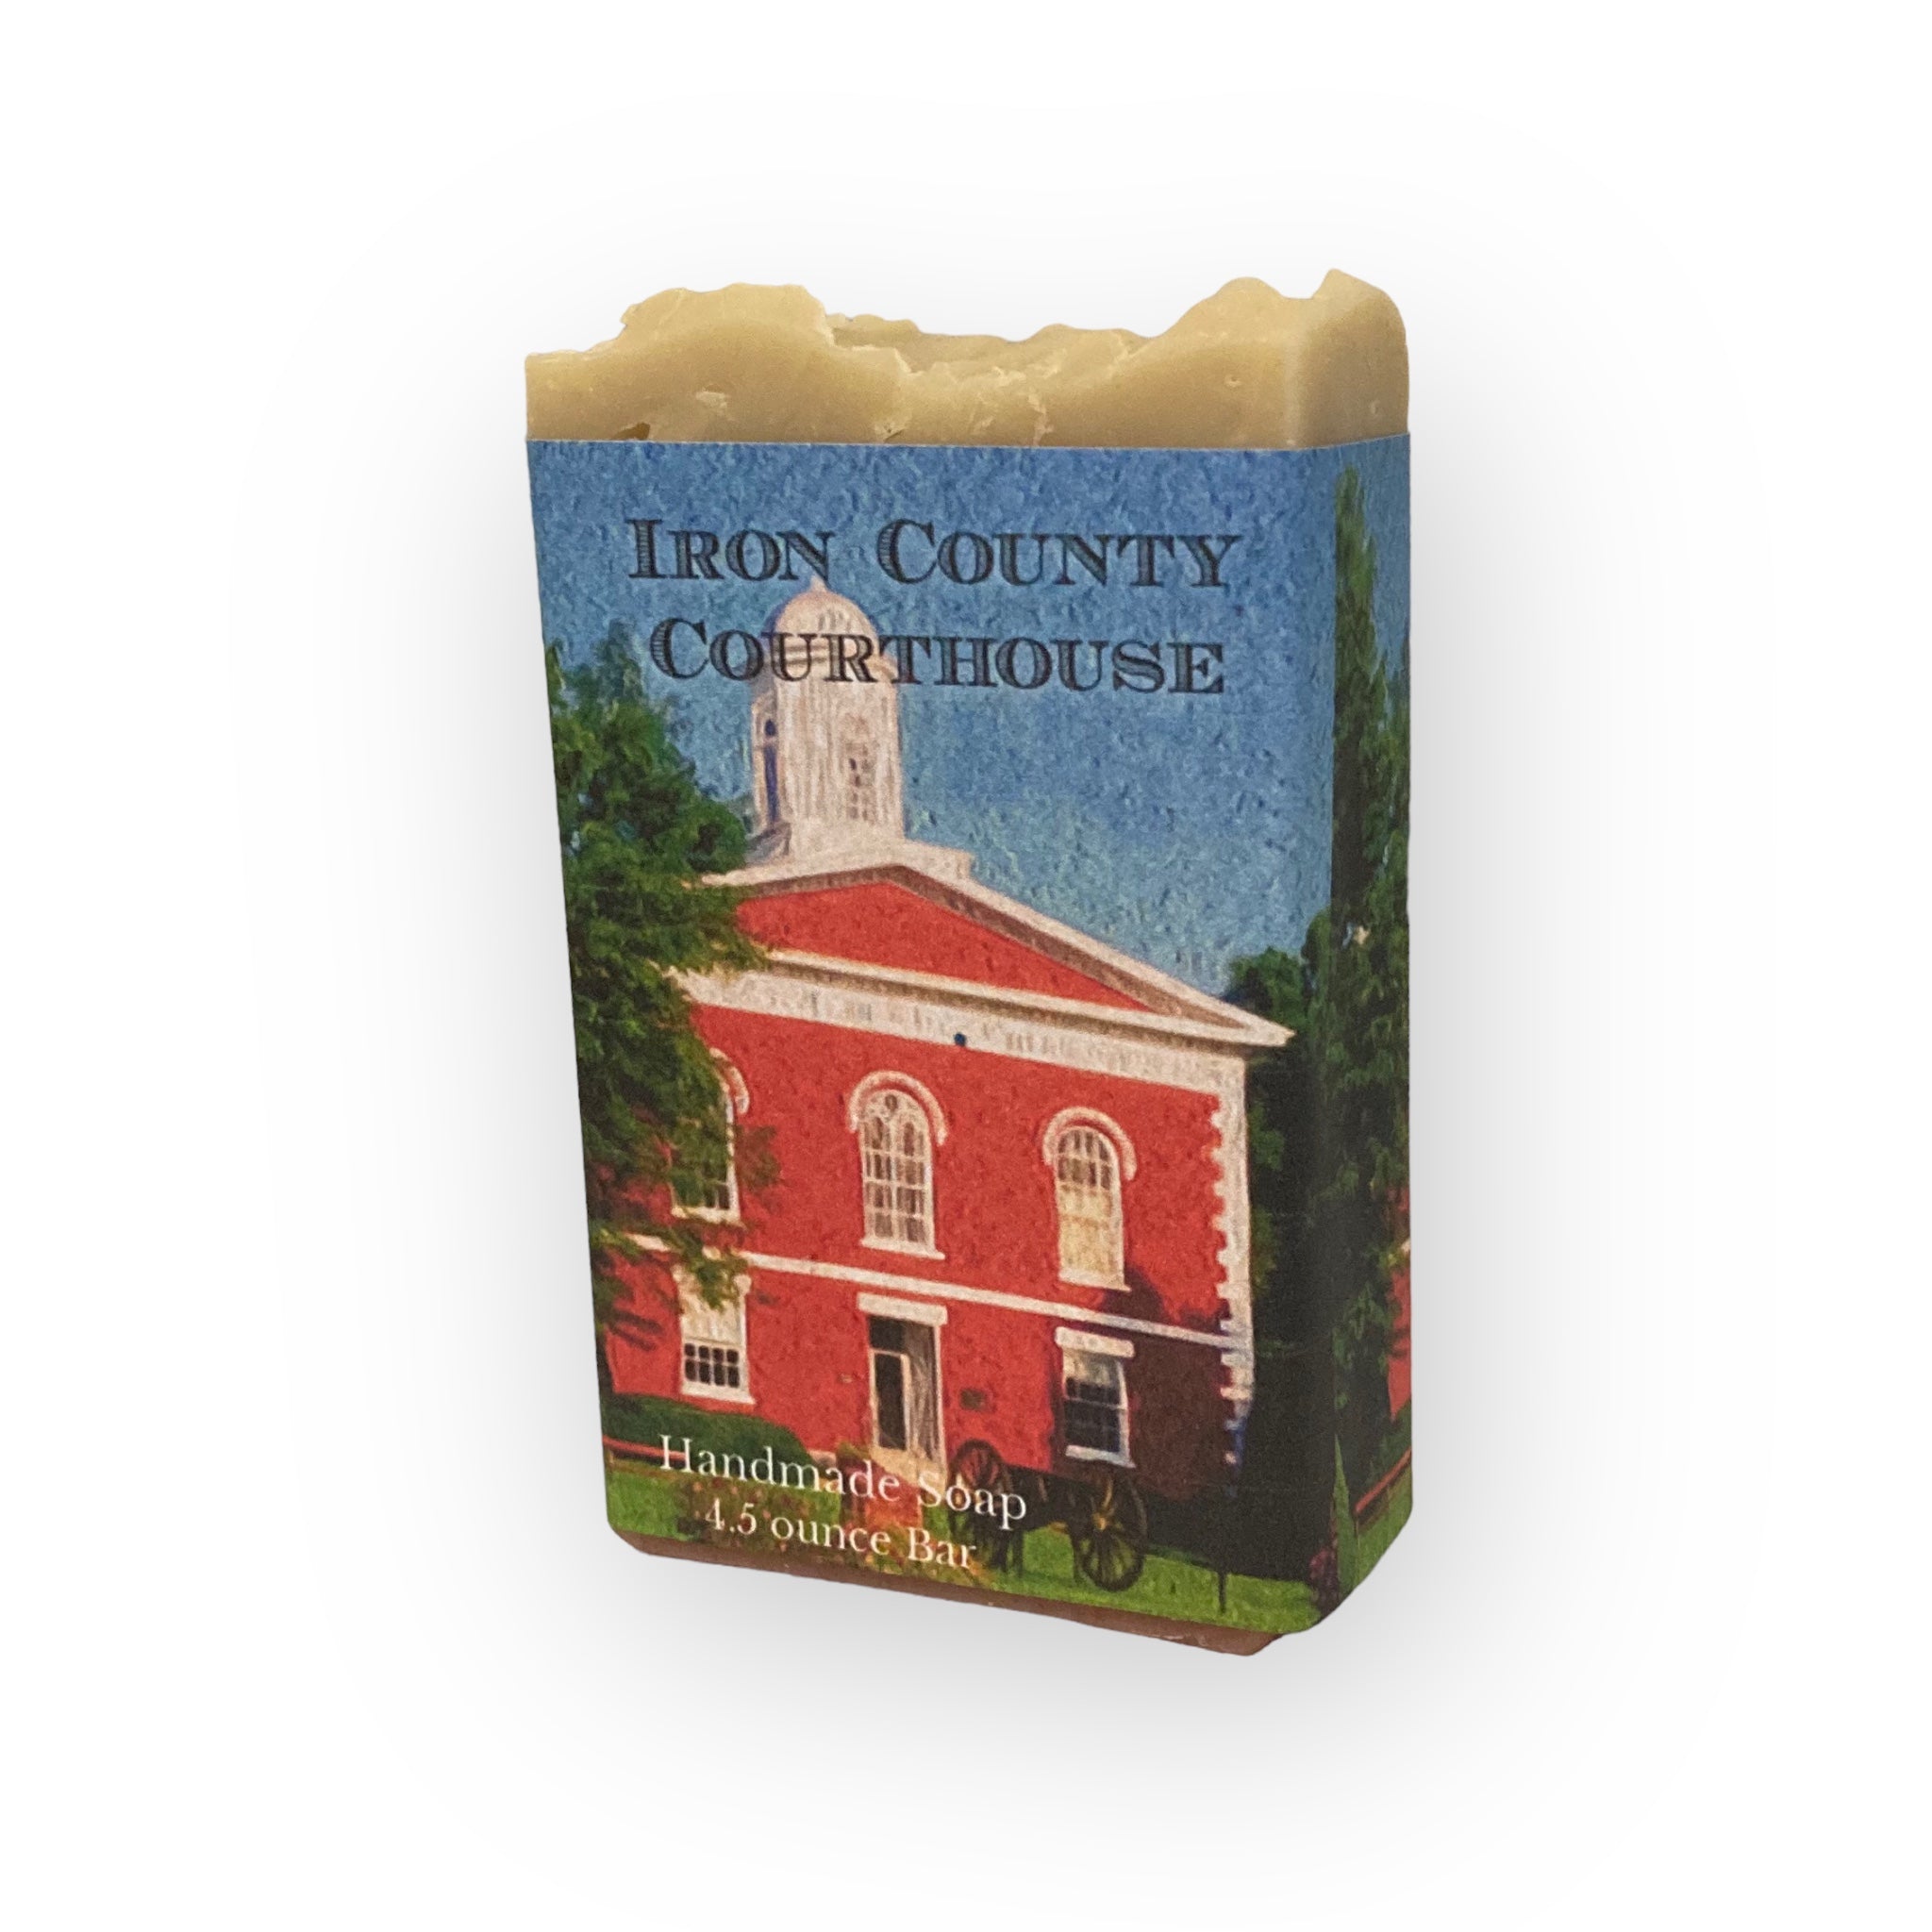 Iron County Courthouse Handmade Soap